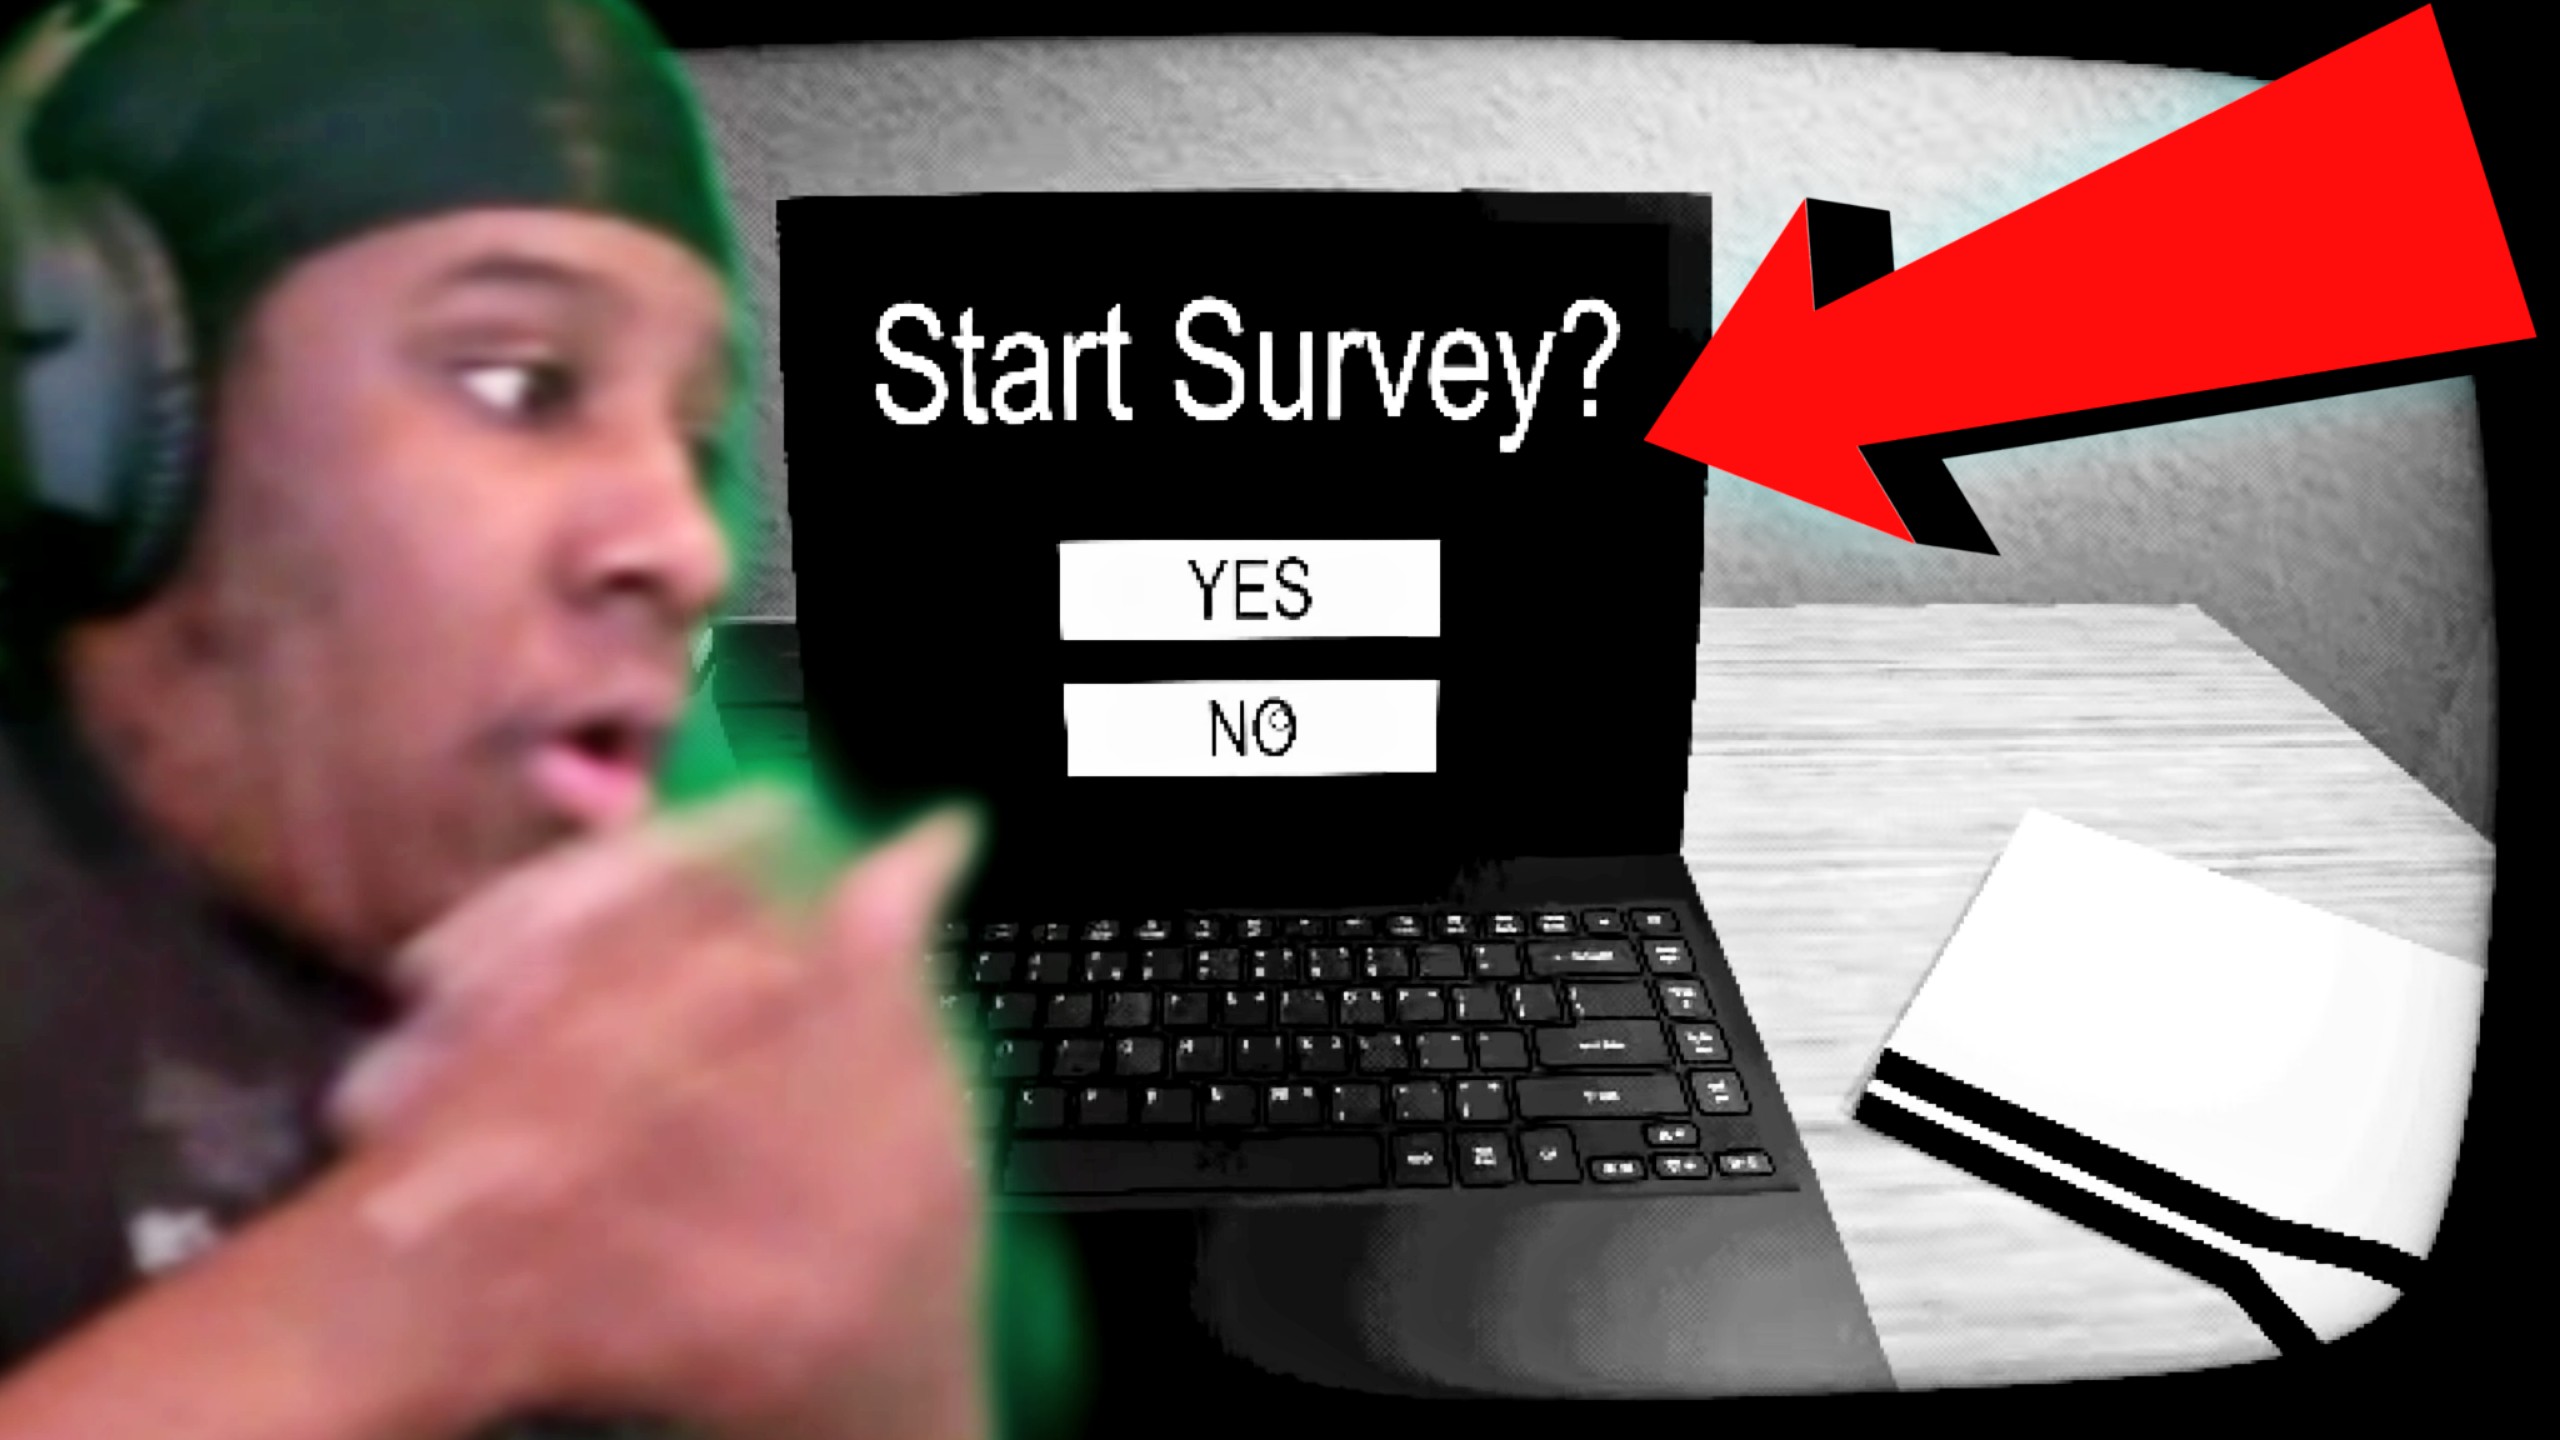 Comments 204 to 165 of 1322 - Start Survey? by PixelDough